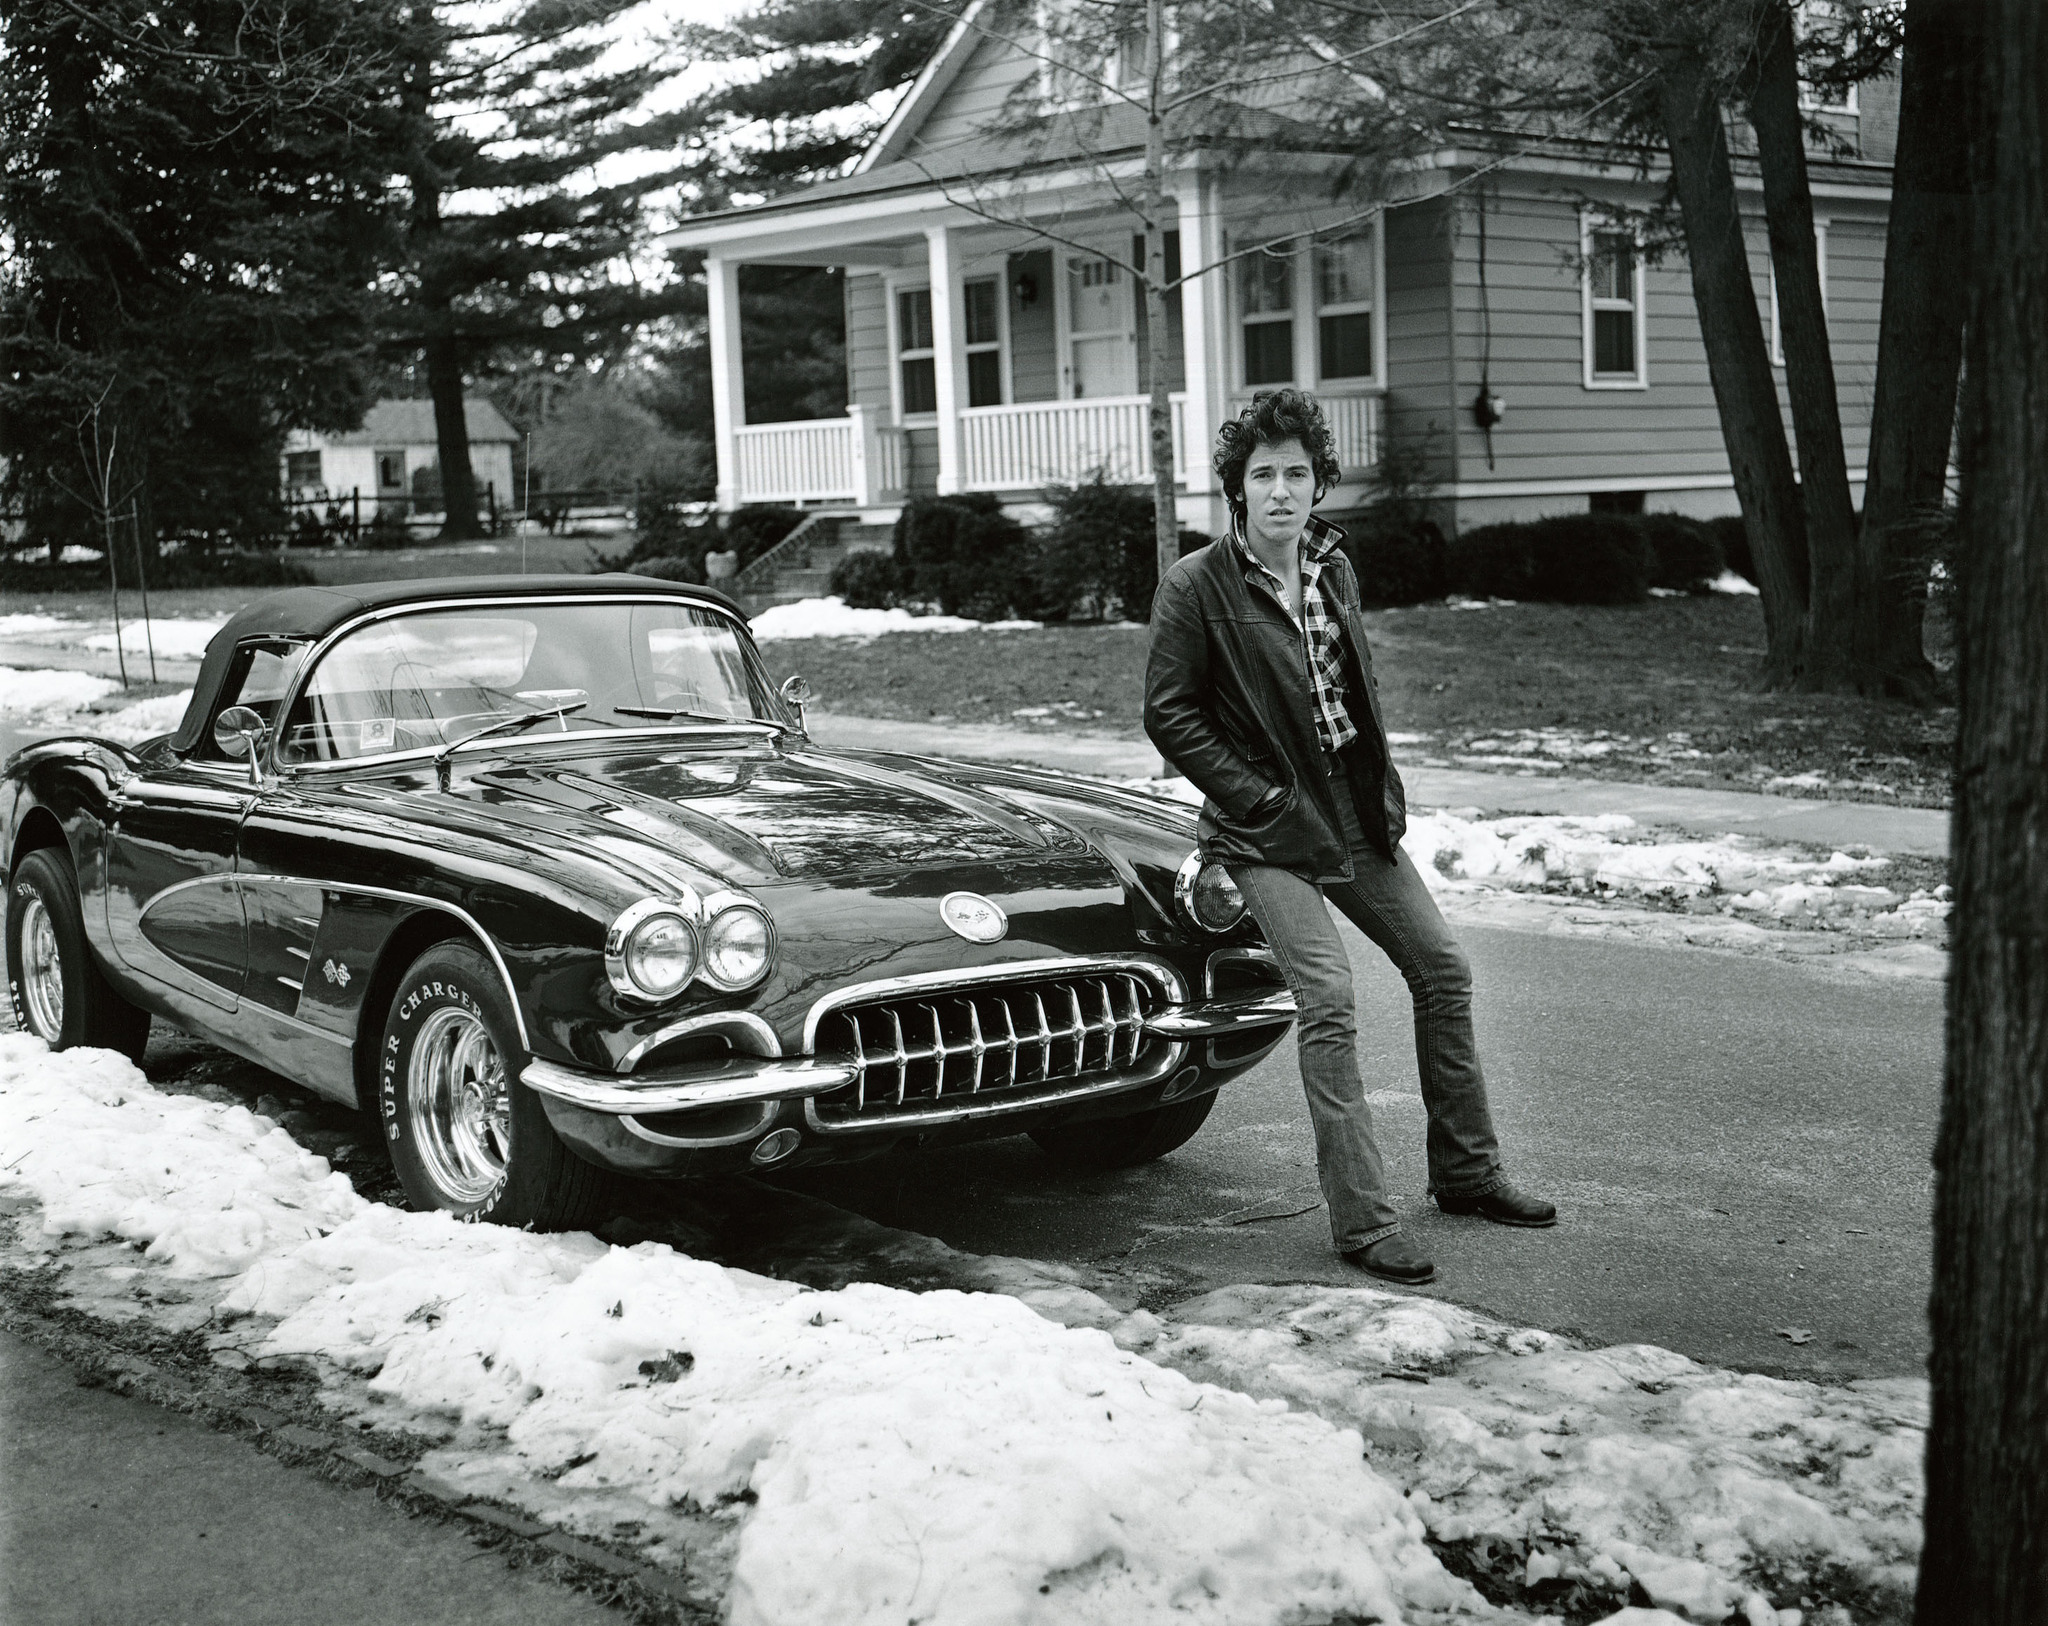 Still of Bruce Springsteen in The Promise: The Making of Darkness on the Edge of Town (2010)